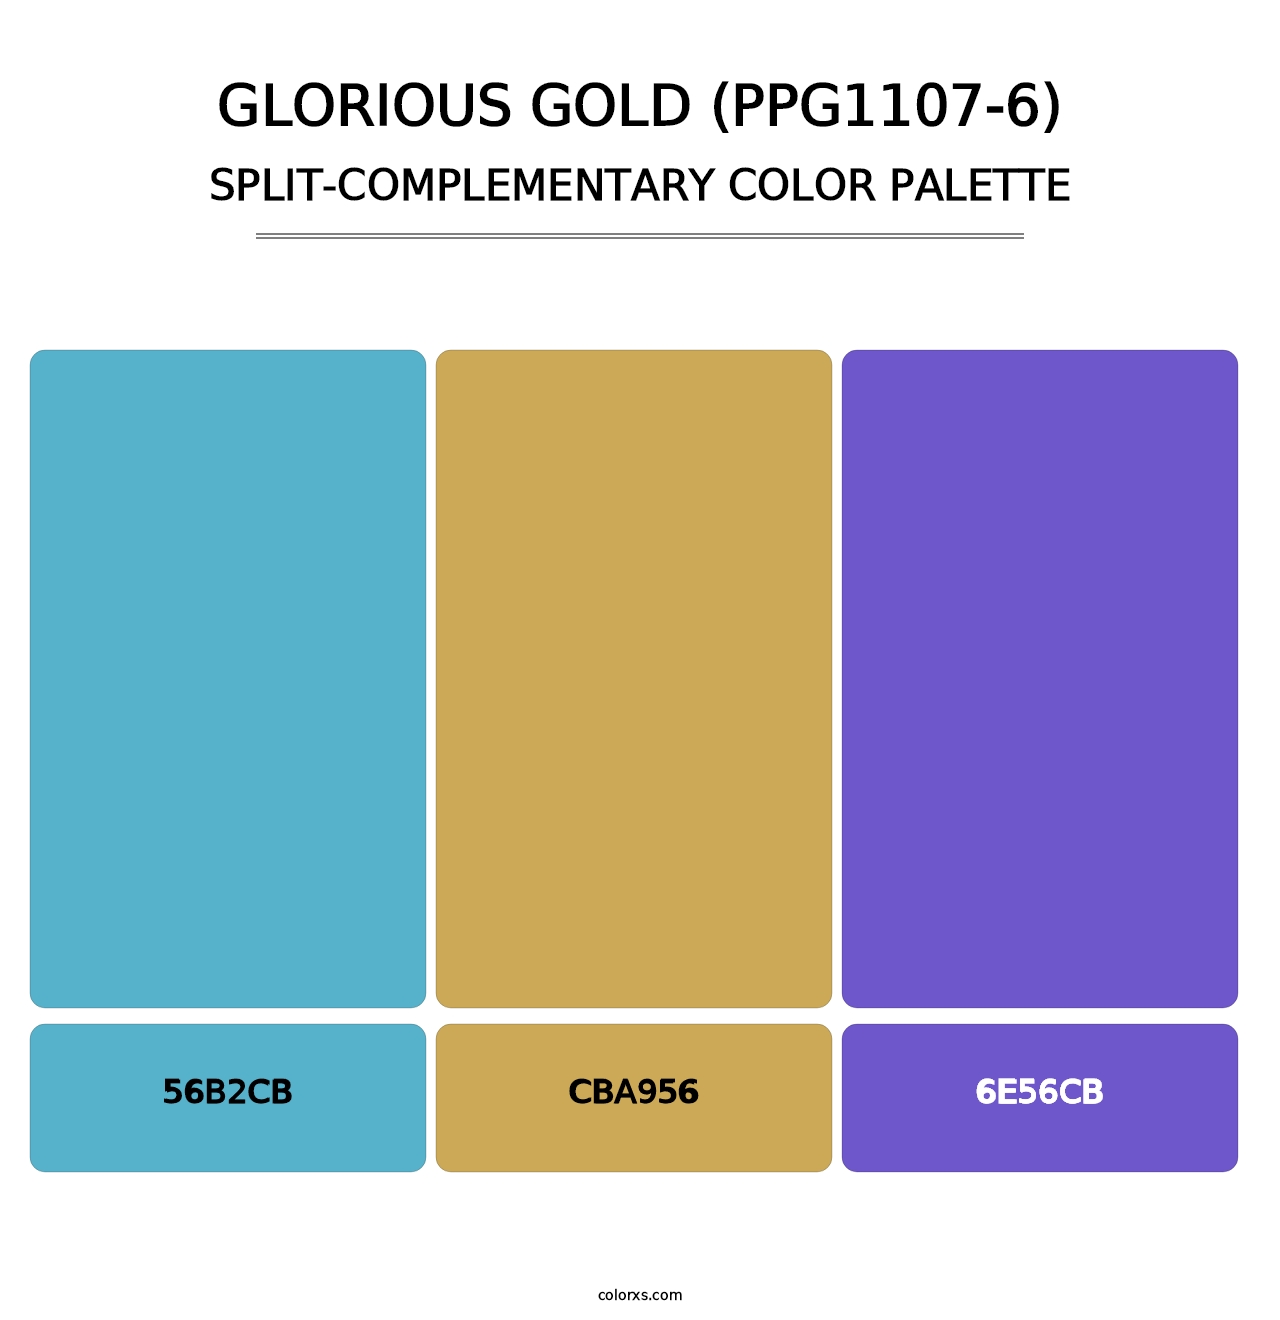 Glorious Gold (PPG1107-6) - Split-Complementary Color Palette